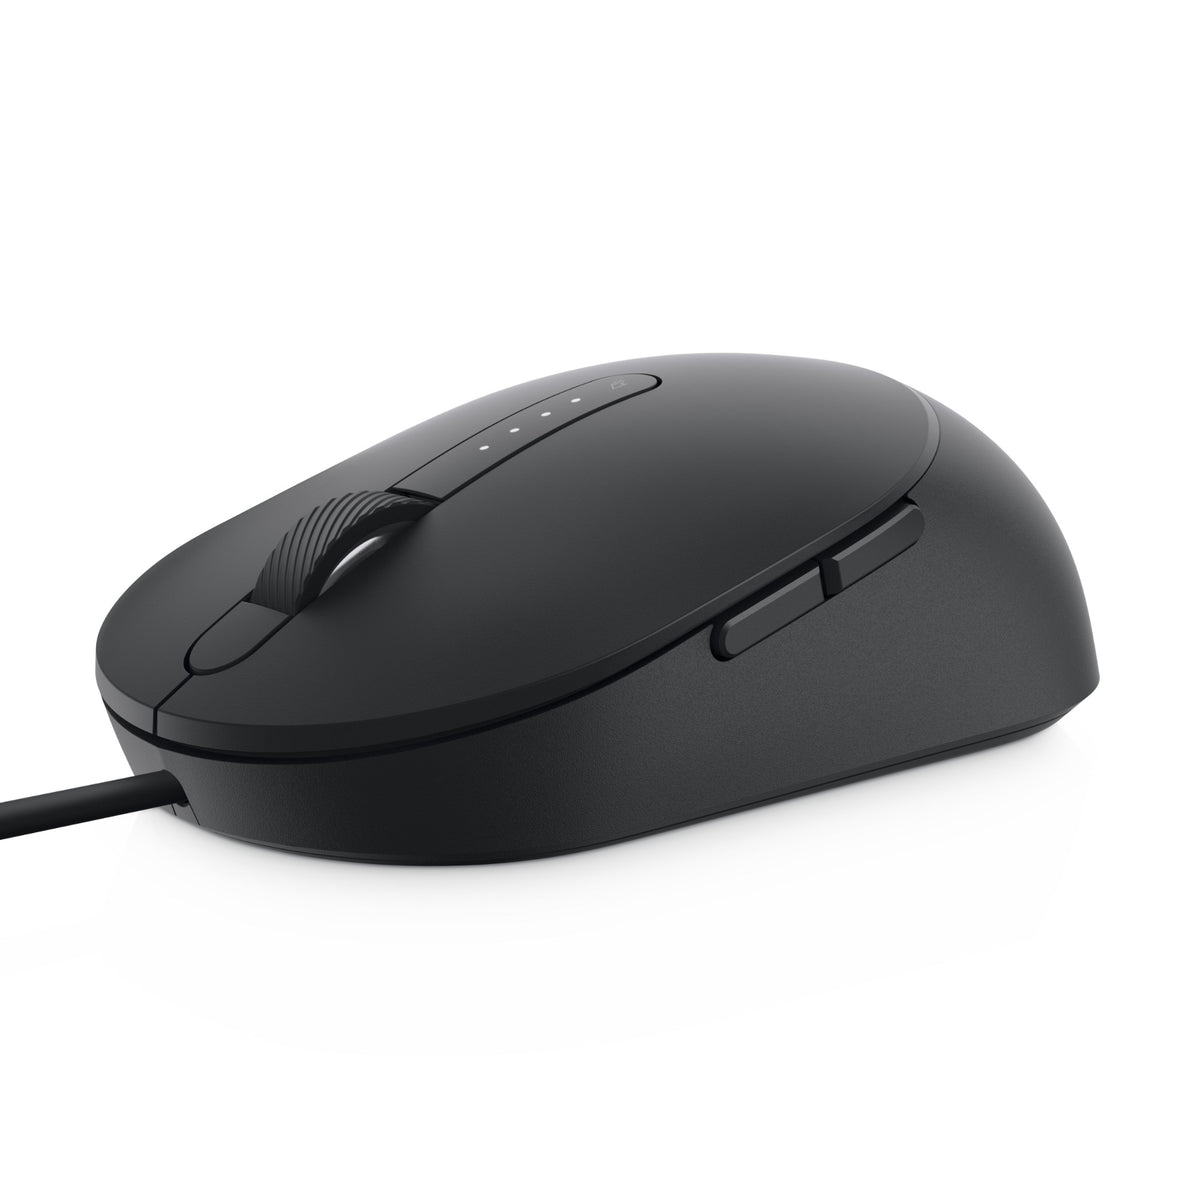 MS3220-BLK - DELL - MS3220 mouse Ambidextrous USB Type-A Laser 3200 DPI